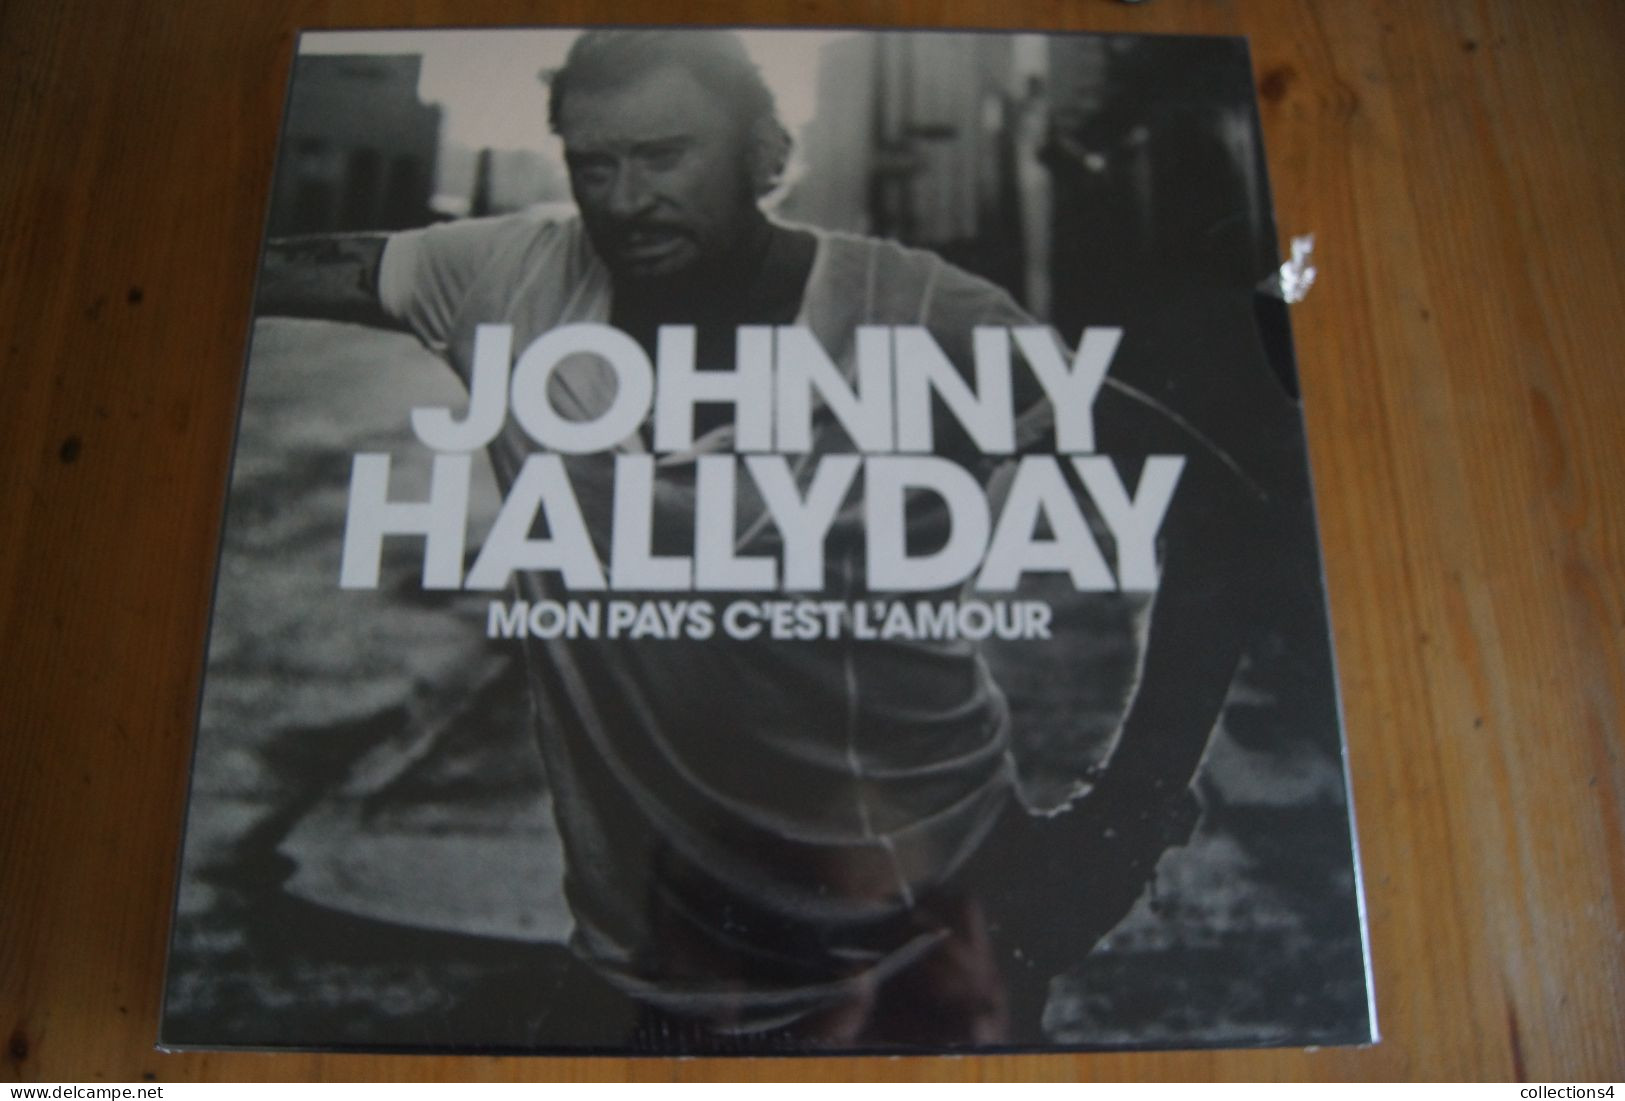 JOHNNY HALLYDAY MON PAYS C EST L AMOUR EDITION COLLECTOR COFFRET NEUF VALEUR+ NUMEROTE ULTRA LIMITE - Special Formats